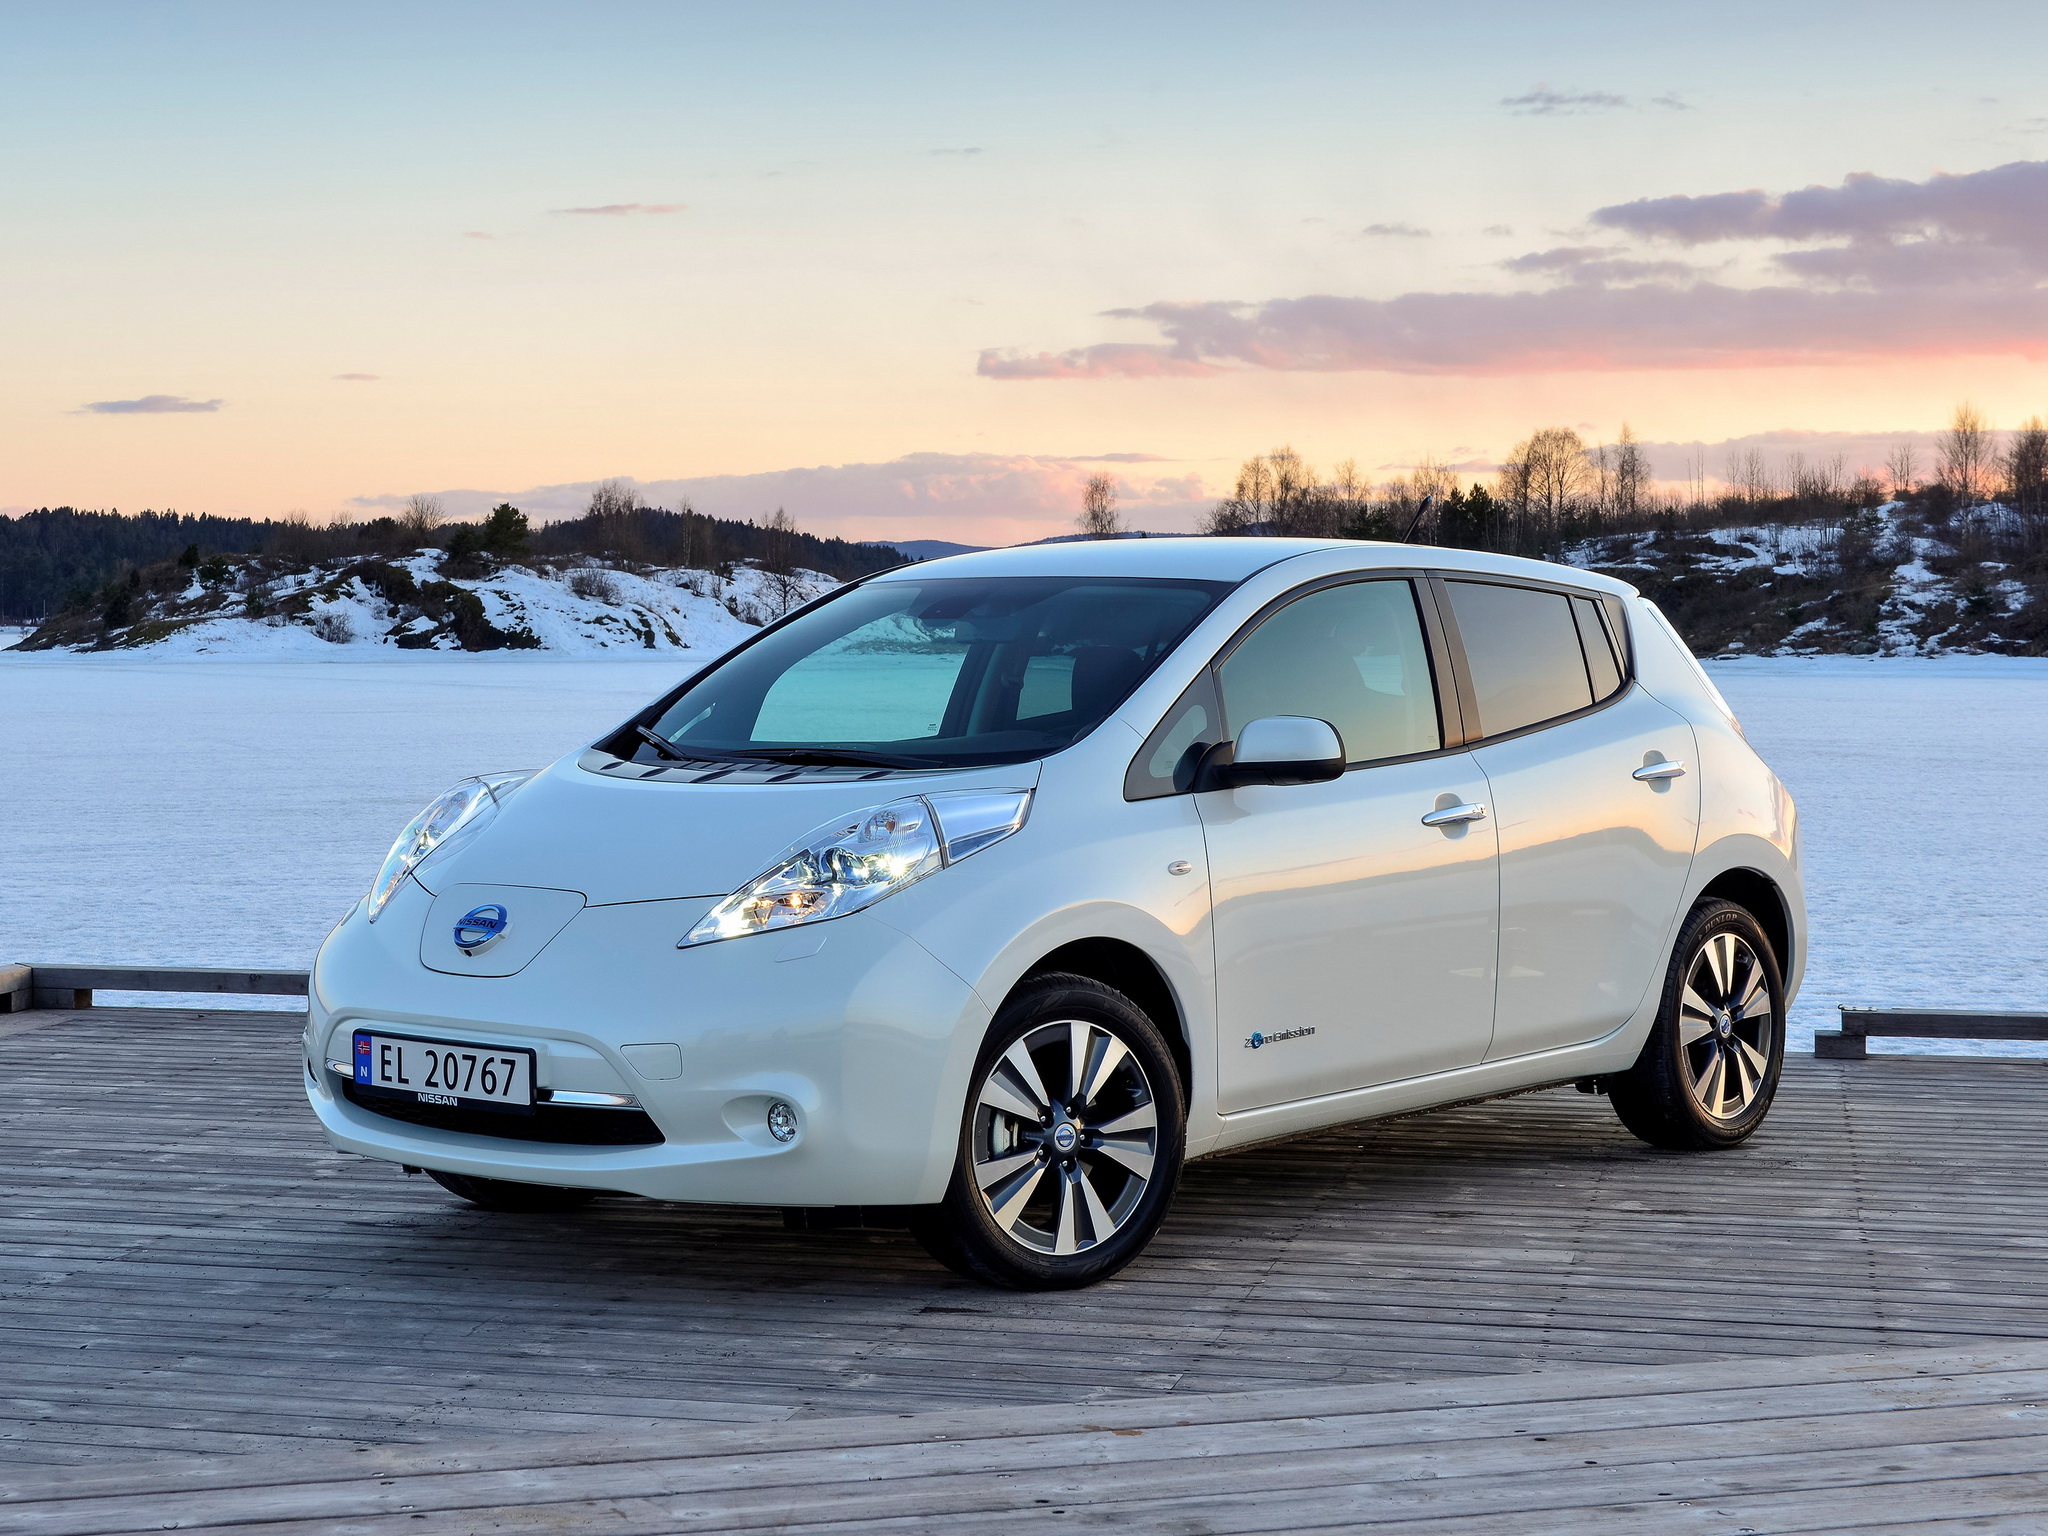 Nissan leaf picture gallery #8